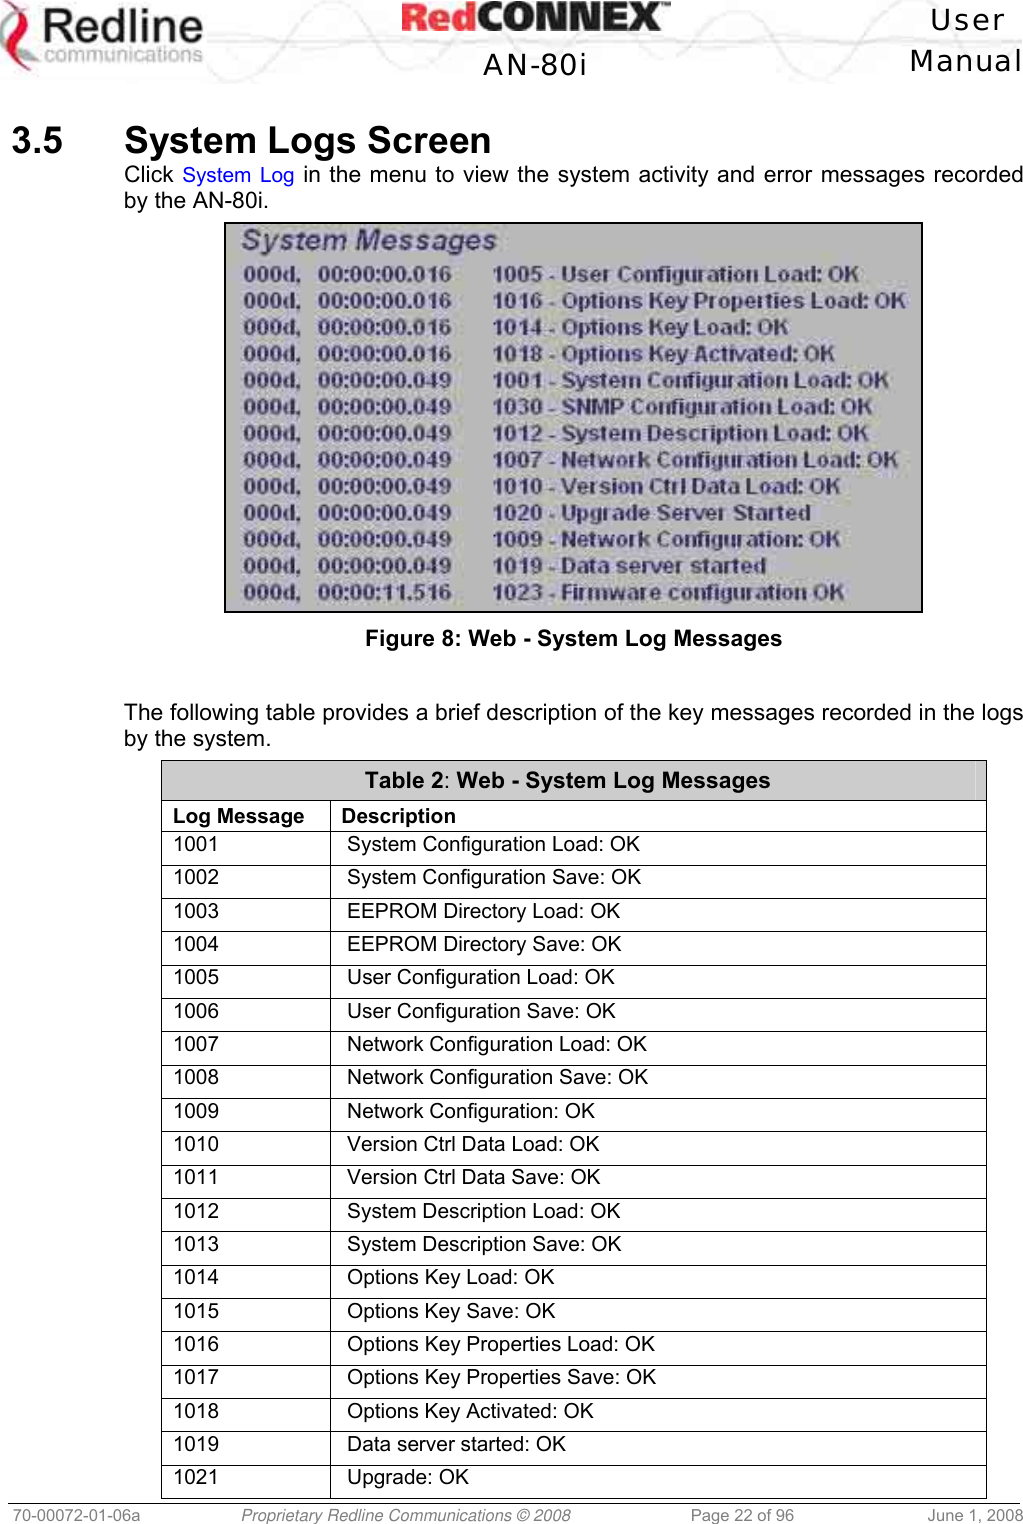   User  AN-80i Manual  70-00072-01-06a  Proprietary Redline Communications © 2008  Page 22 of 96  June 1, 2008  3.5  System Logs Screen Click System Log in the menu to view the system activity and error messages recorded by the AN-80i.  Figure 8: Web - System Log Messages  The following table provides a brief description of the key messages recorded in the logs by the system. Table 2: Web - System Log Messages Log Message  Description 1001    System Configuration Load: OK 1002    System Configuration Save: OK 1003    EEPROM Directory Load: OK 1004    EEPROM Directory Save: OK 1005    User Configuration Load: OK 1006    User Configuration Save: OK 1007    Network Configuration Load: OK 1008    Network Configuration Save: OK 1009    Network Configuration: OK 1010    Version Ctrl Data Load: OK 1011    Version Ctrl Data Save: OK 1012    System Description Load: OK 1013    System Description Save: OK 1014    Options Key Load: OK 1015    Options Key Save: OK 1016    Options Key Properties Load: OK 1017    Options Key Properties Save: OK 1018    Options Key Activated: OK 1019    Data server started: OK 1021    Upgrade: OK 